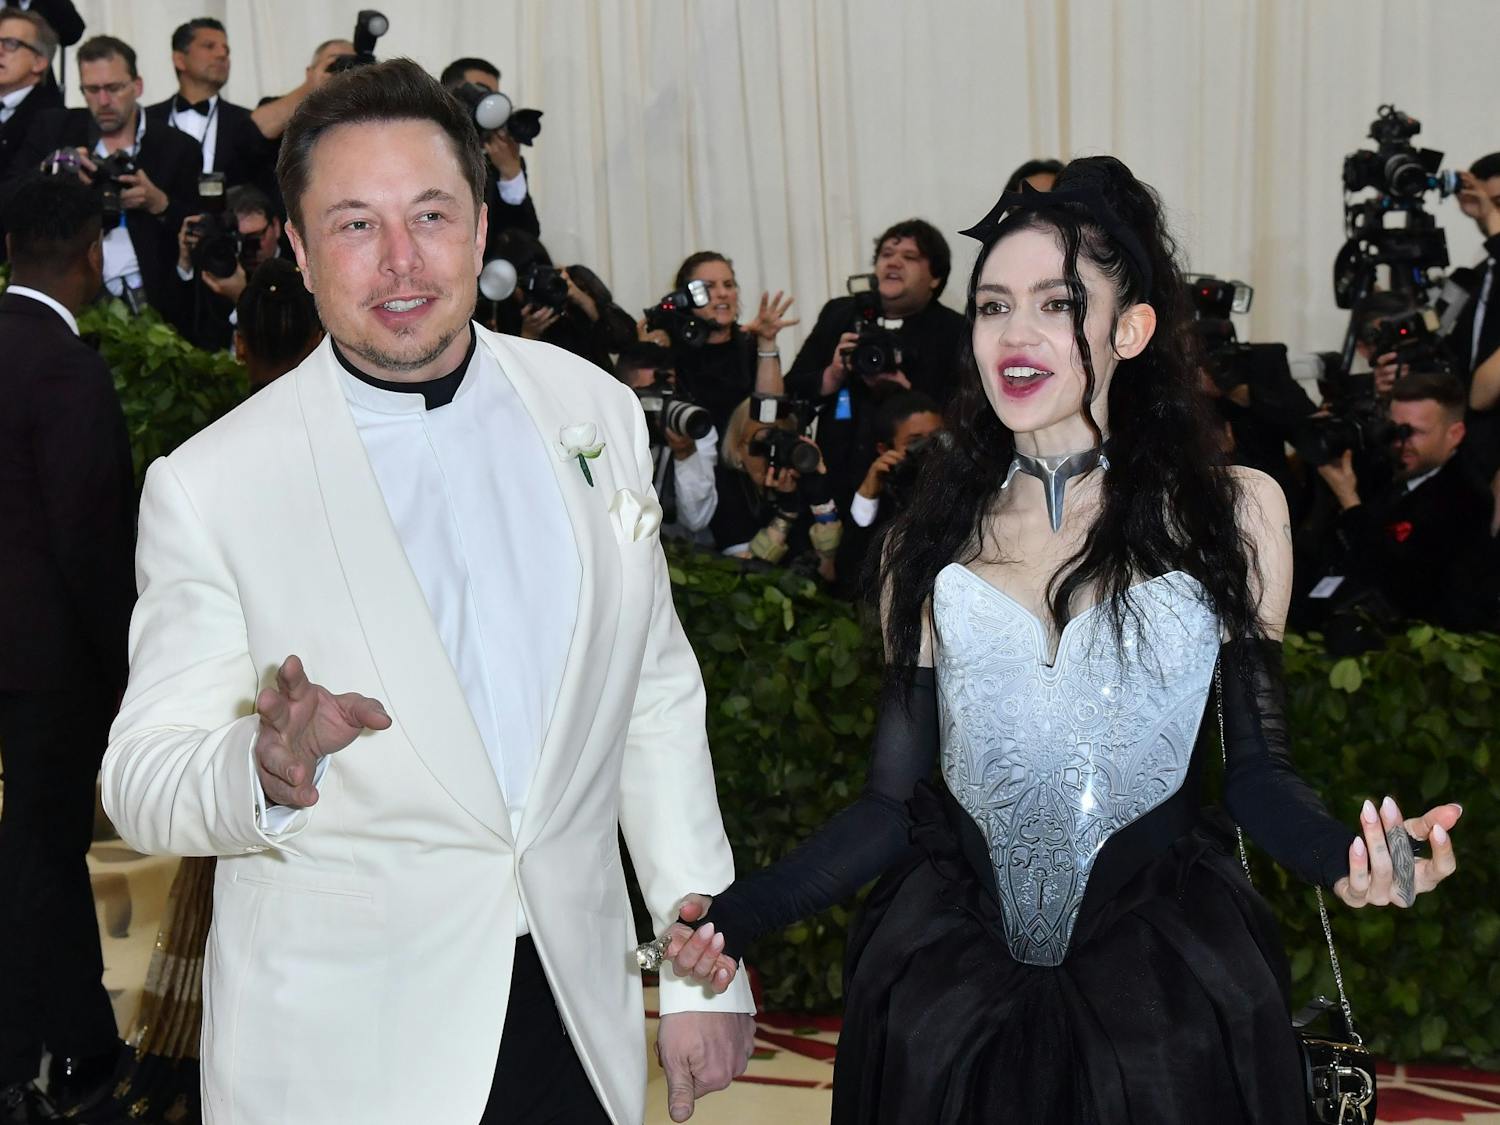 Elon Musk and Grimes arrive for the 2018 Met Gala on May 7, 2018, at the Metropolitan Museum of Art in New York. Photo courtesy of Angela Weiss/AFP via Getty Images/TNS.